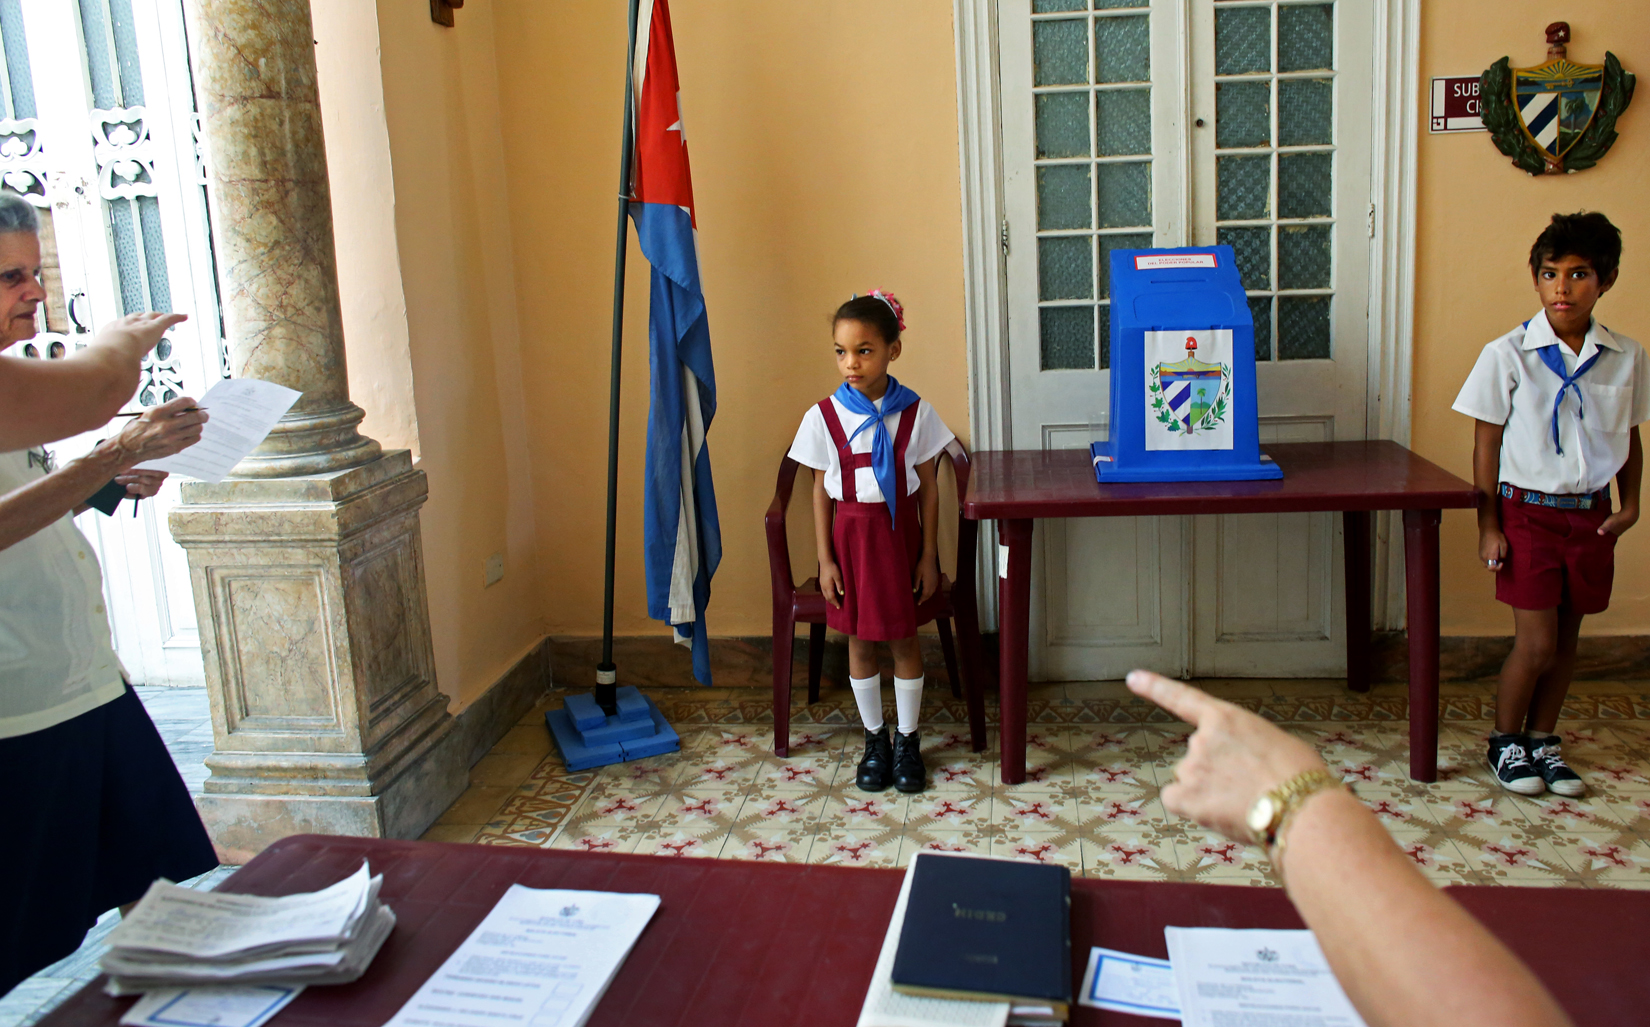 Children wearing the uniform of communist youth are directed to salute {quote}Votó!{quote} ({quote}S/he voted!{quote}) as a woman places her ballot in Cuba's Elecciones Parciales (Partial Elections) to elect delegates to the Municipal Assemblies of People’s Power, the country's unicameral parliament, on April 19, 2015 in Havana, Cuba. The delegates function as district representatives for a 2.5 year term.Little Pioneers - members of the José Martí Pioneer Organization for children operated by the communist party - are often sent by polling station presidents to people's homes as a means to motivate citizens to the polls. (Voting is not mandatory, but frowned upon if not exercised.) Kids usually enter the organization in elementary school, wearing blue or red scarves - or pañoletas - to indicate the student's level, and continue until adolescence, switching to yellow and white uniforms in high school. 